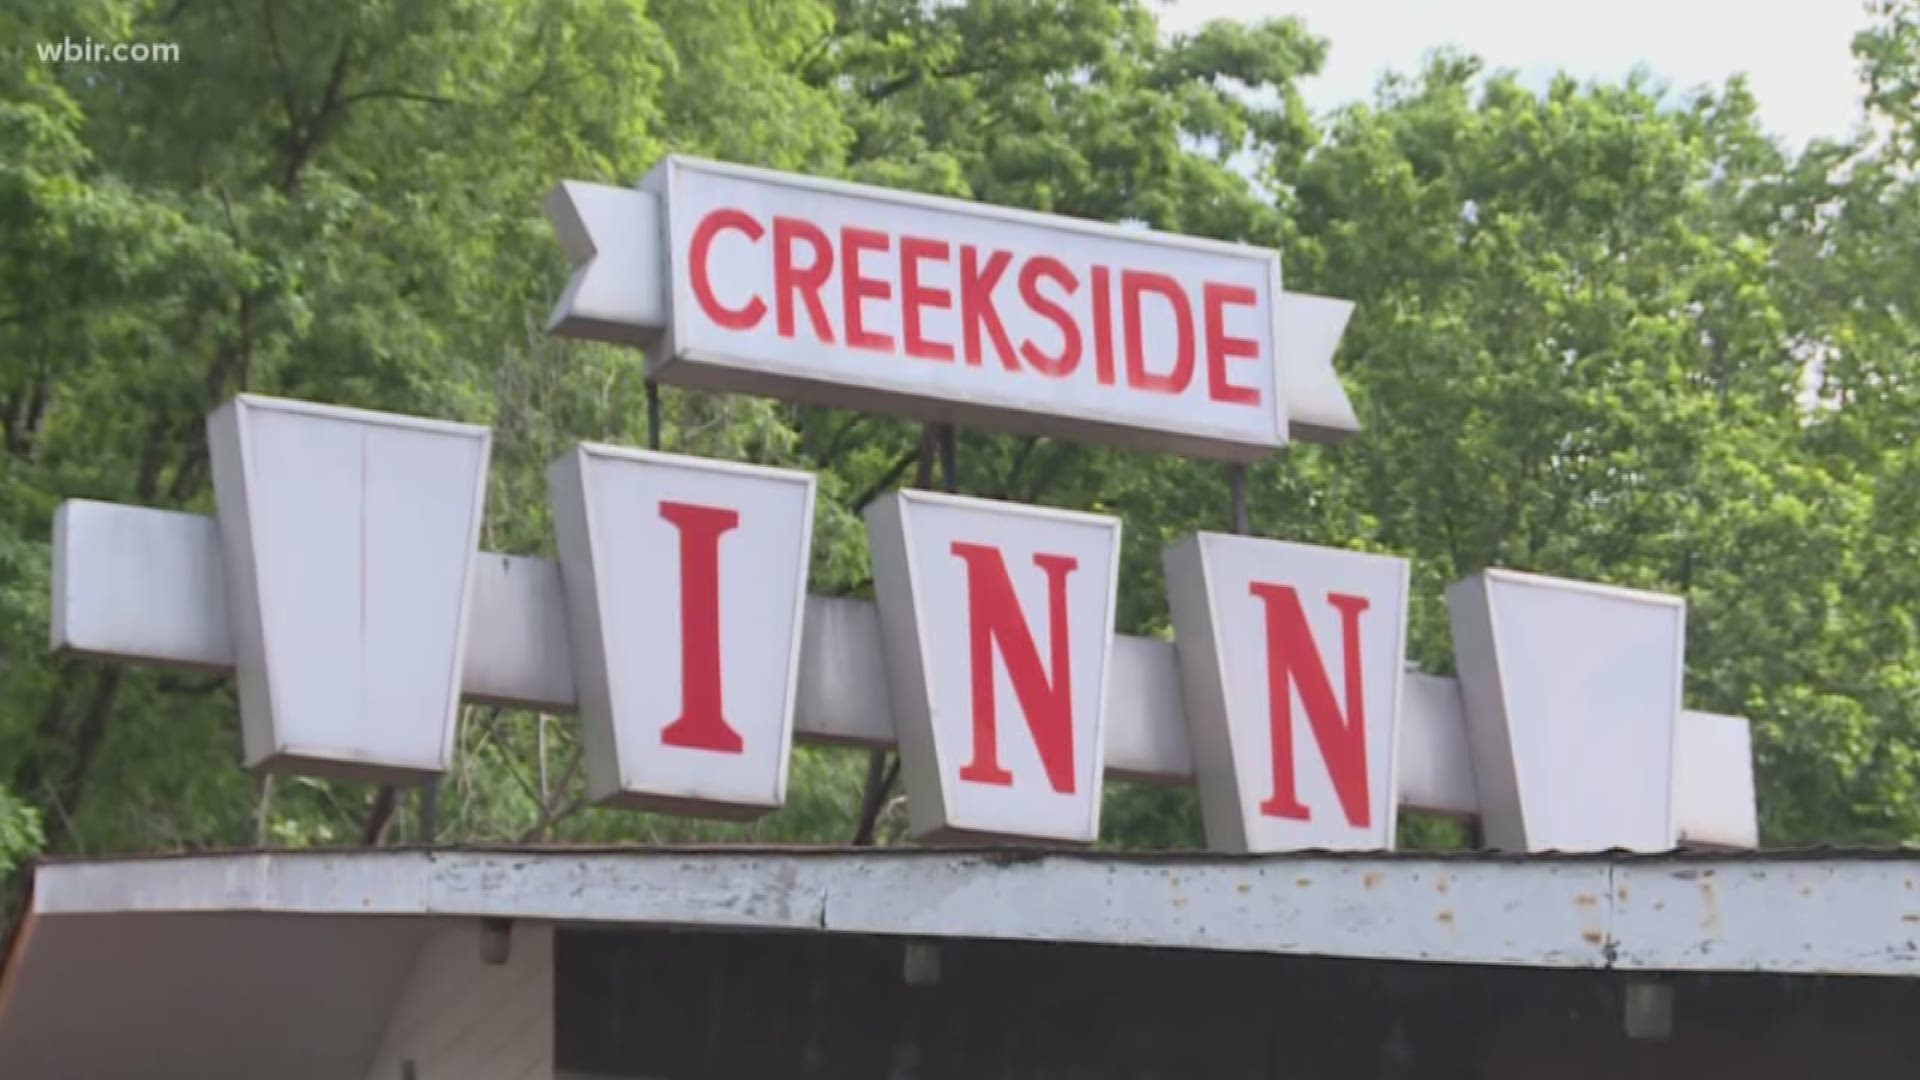 A desperate situation has developed in Sevier County after dozens of long-term renters at Creekside Inn of the Smokies and Ski View Motel in Gatlinburg had their power suddenly shut off with little notice.